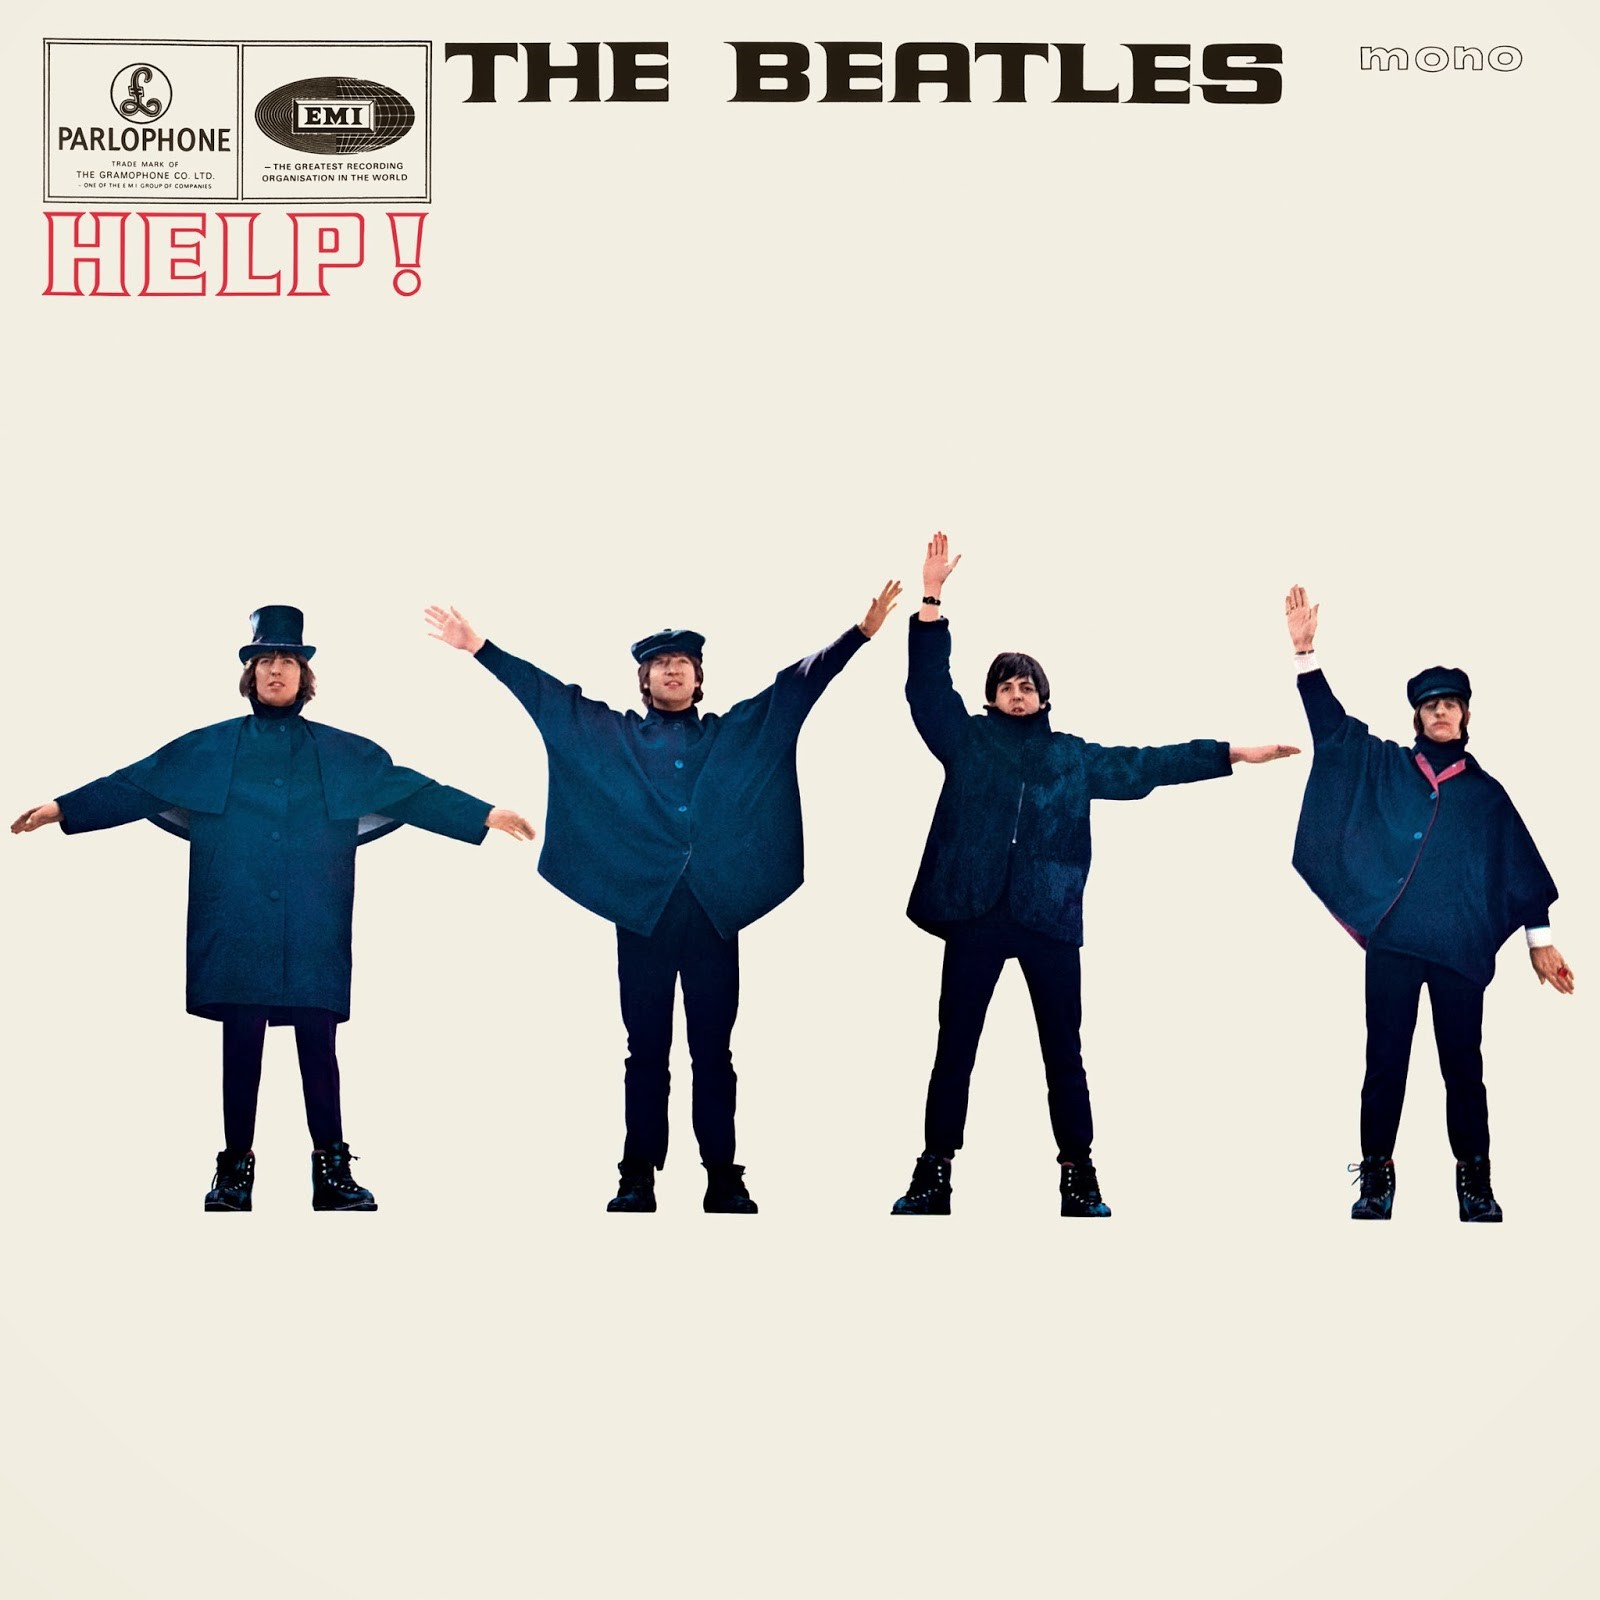 album cover for The Beatles group of musicians